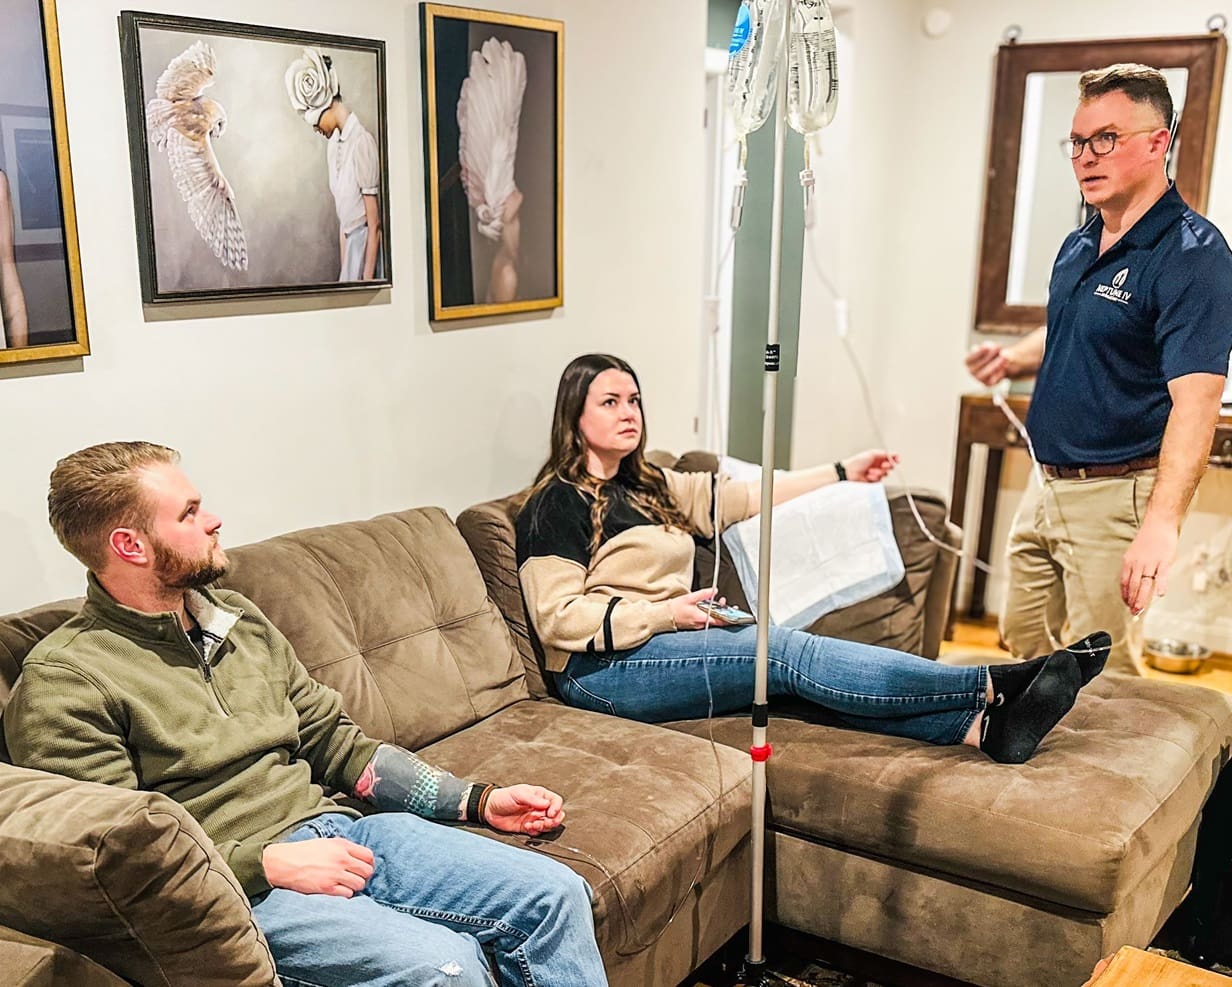 Three people in a casual living room setting, one appears to be giving a presentation or explaining something to the other two who are seated on a brown sofa, while a mobile IV hydration stand suggests a healthcare